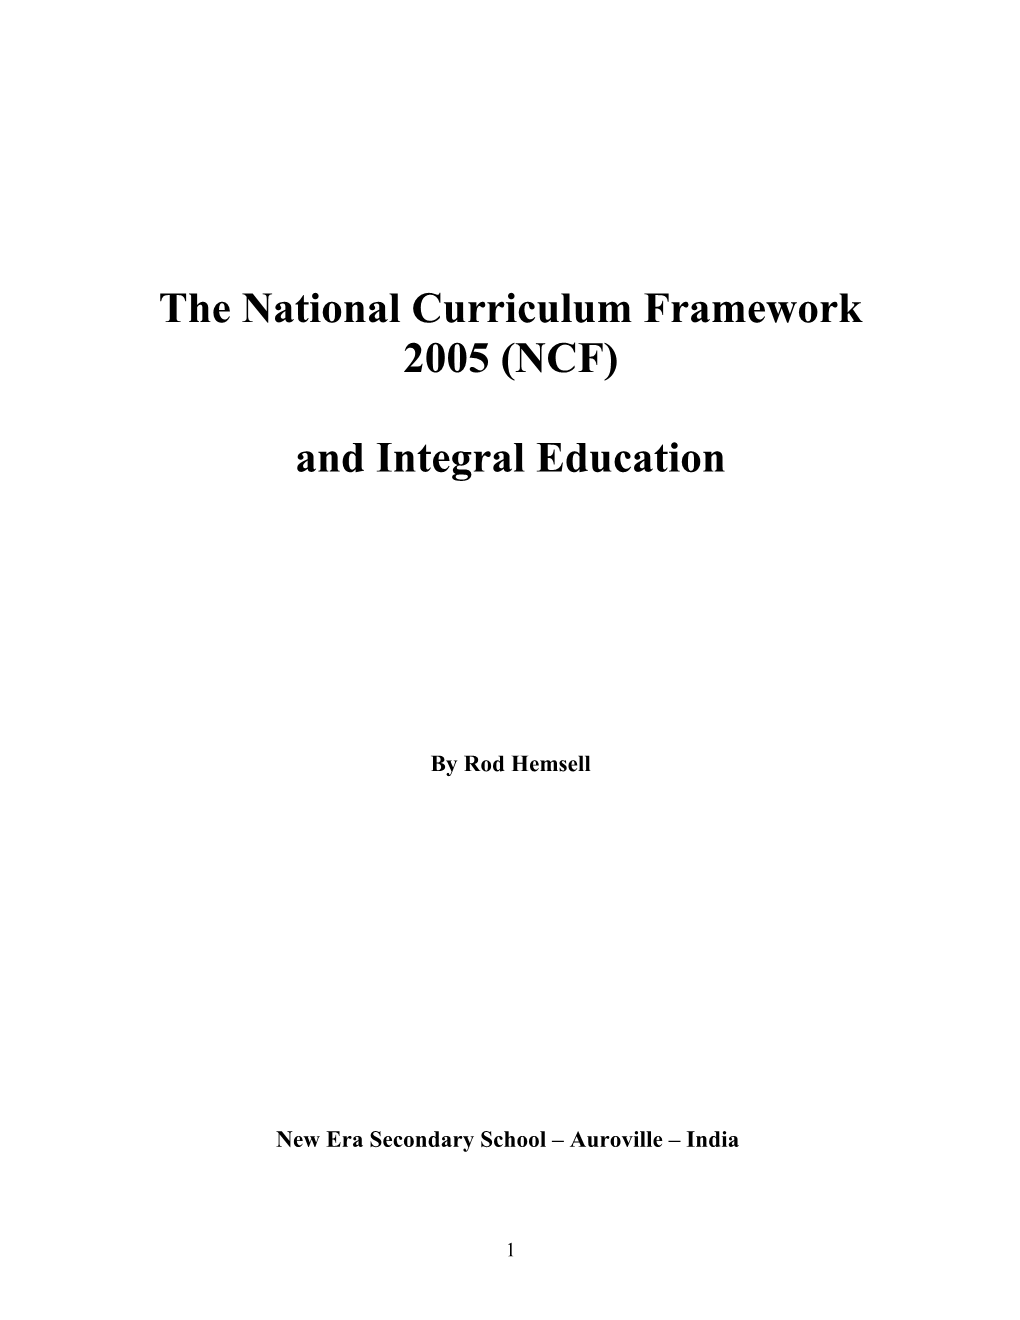 The National Curriculum Framework 2005 (NCF) and Auroville Education